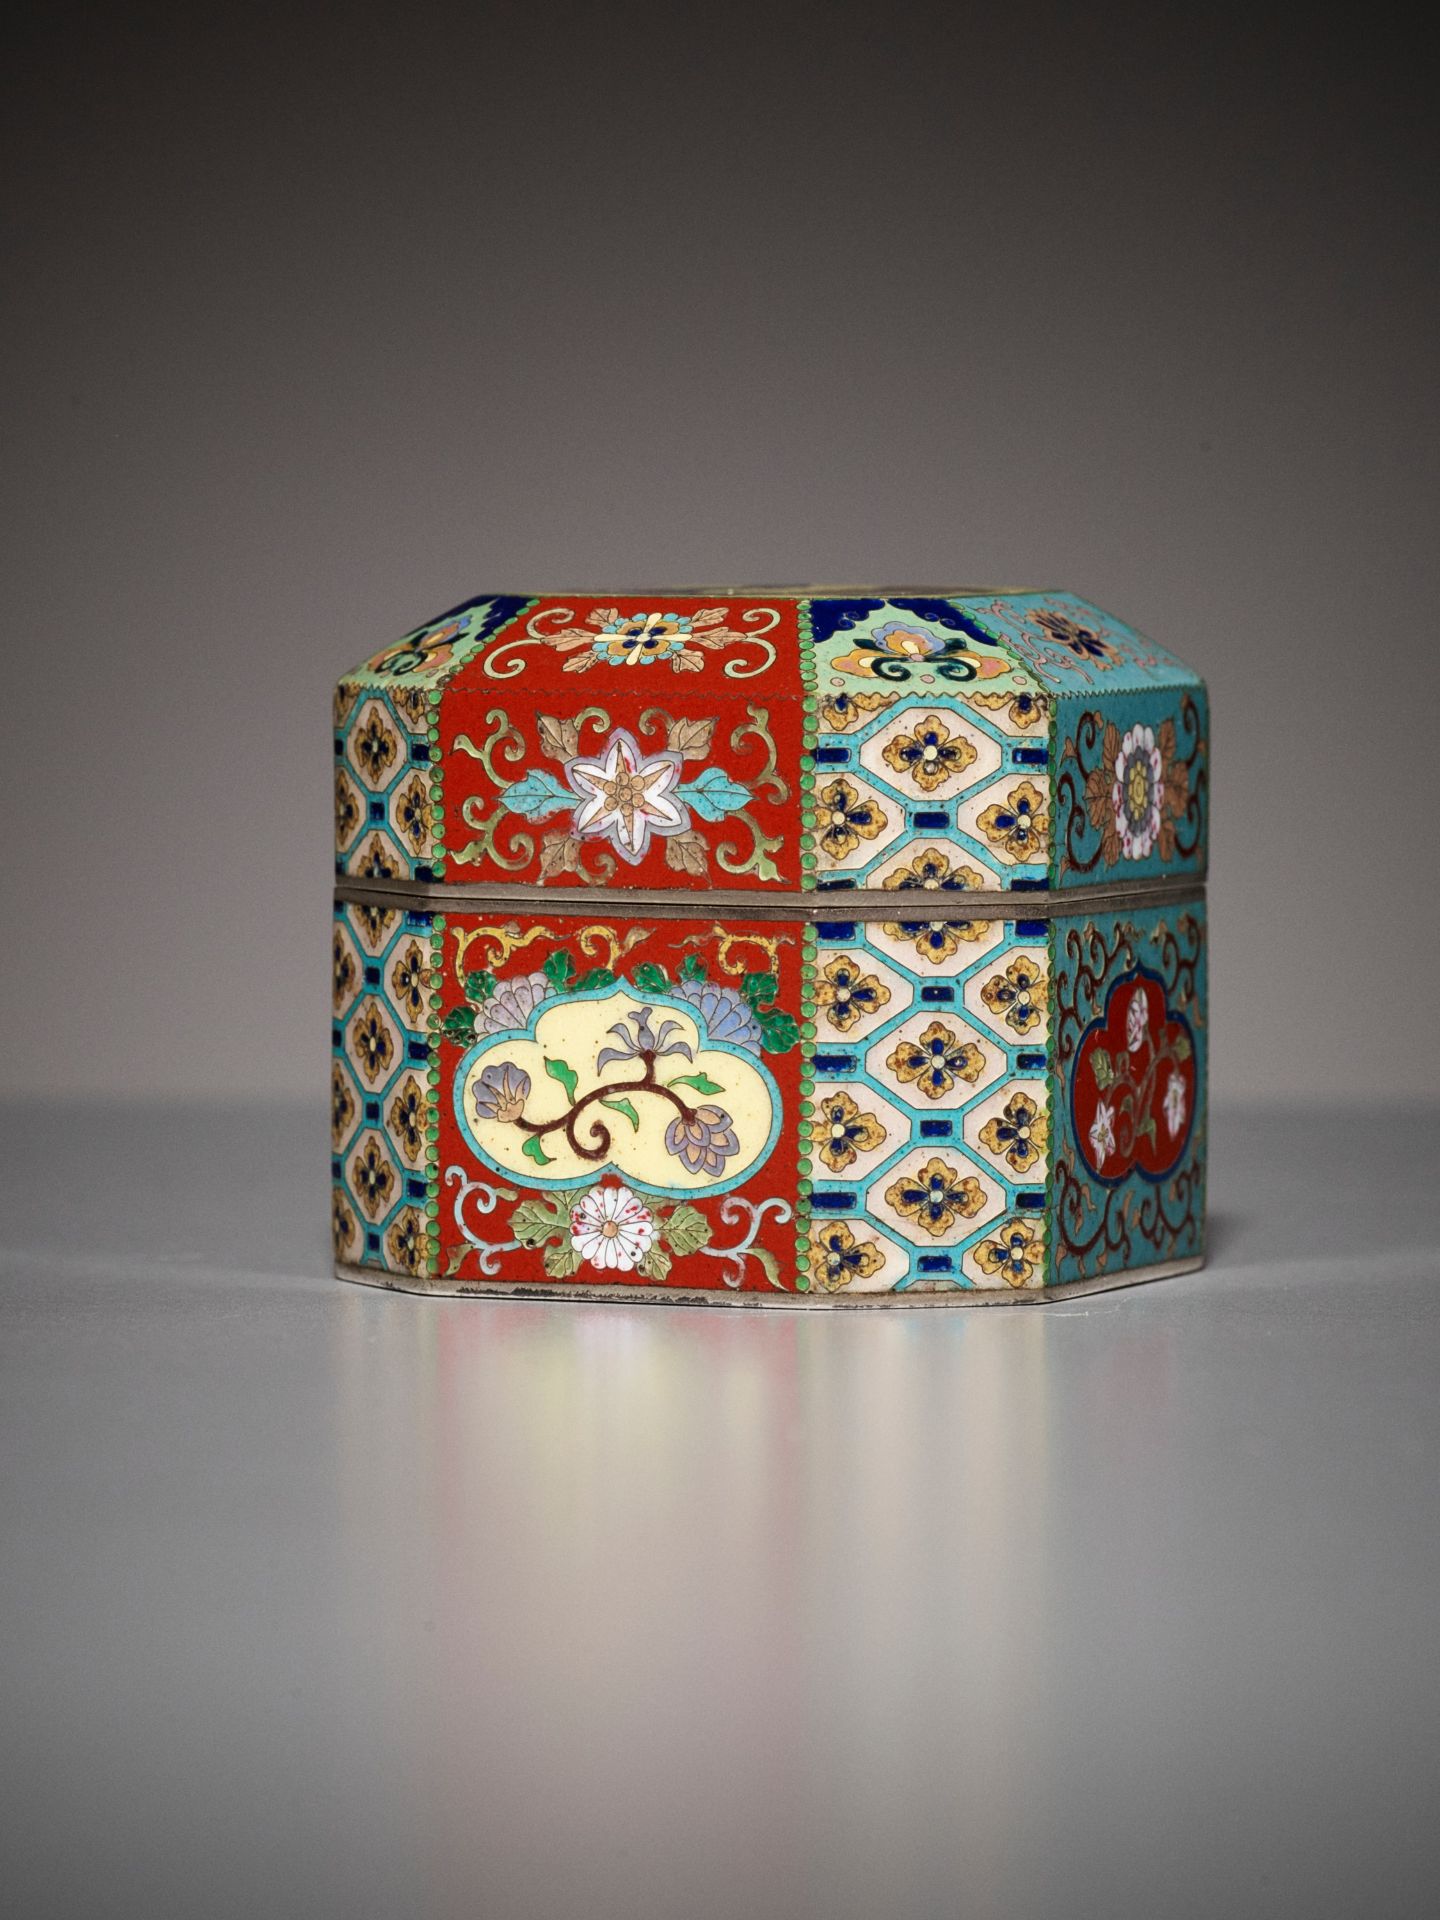 A SUPERB MINIATURE CLOISONNE ENAMEL BOX AND COVER - Image 11 of 16